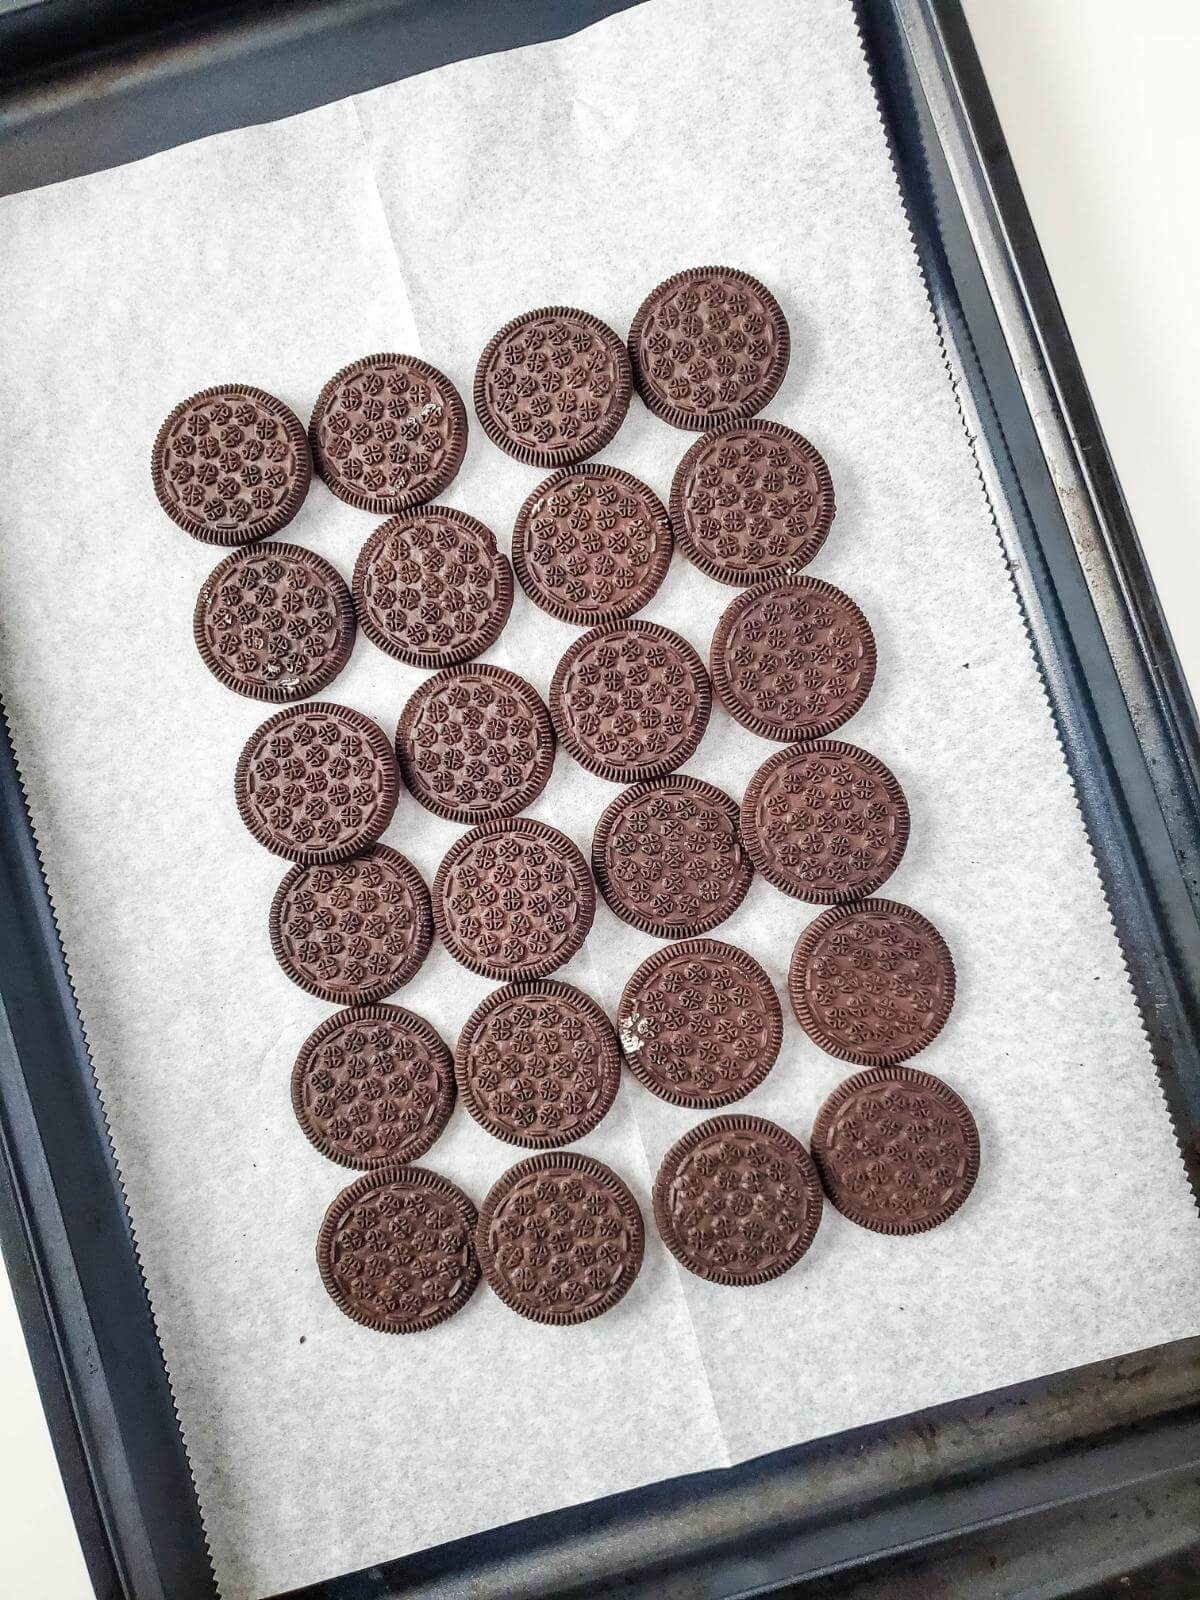 Oreos on a parchment paper lined baking sheet.